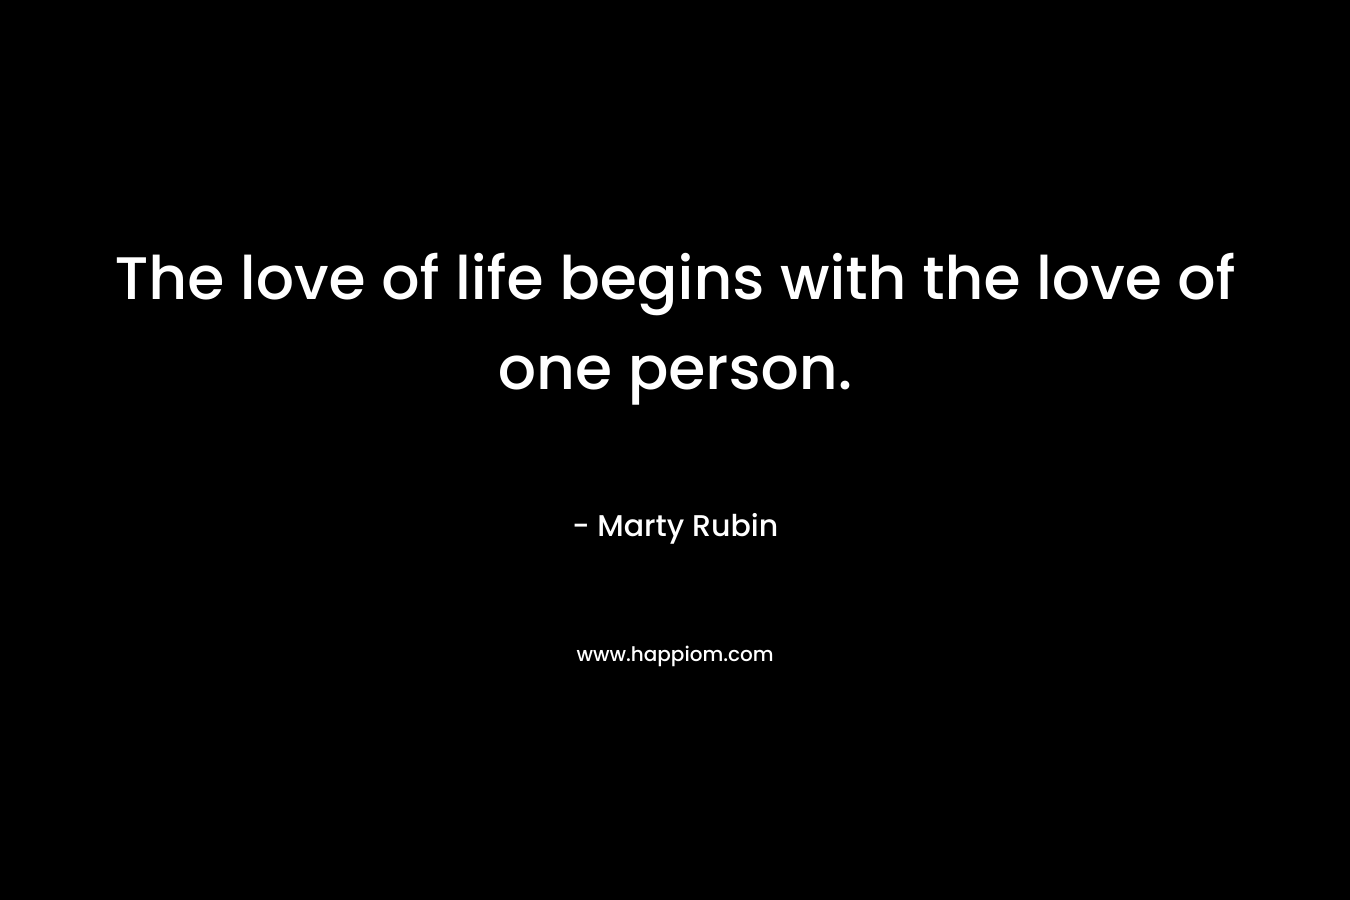 The love of life begins with the love of one person.